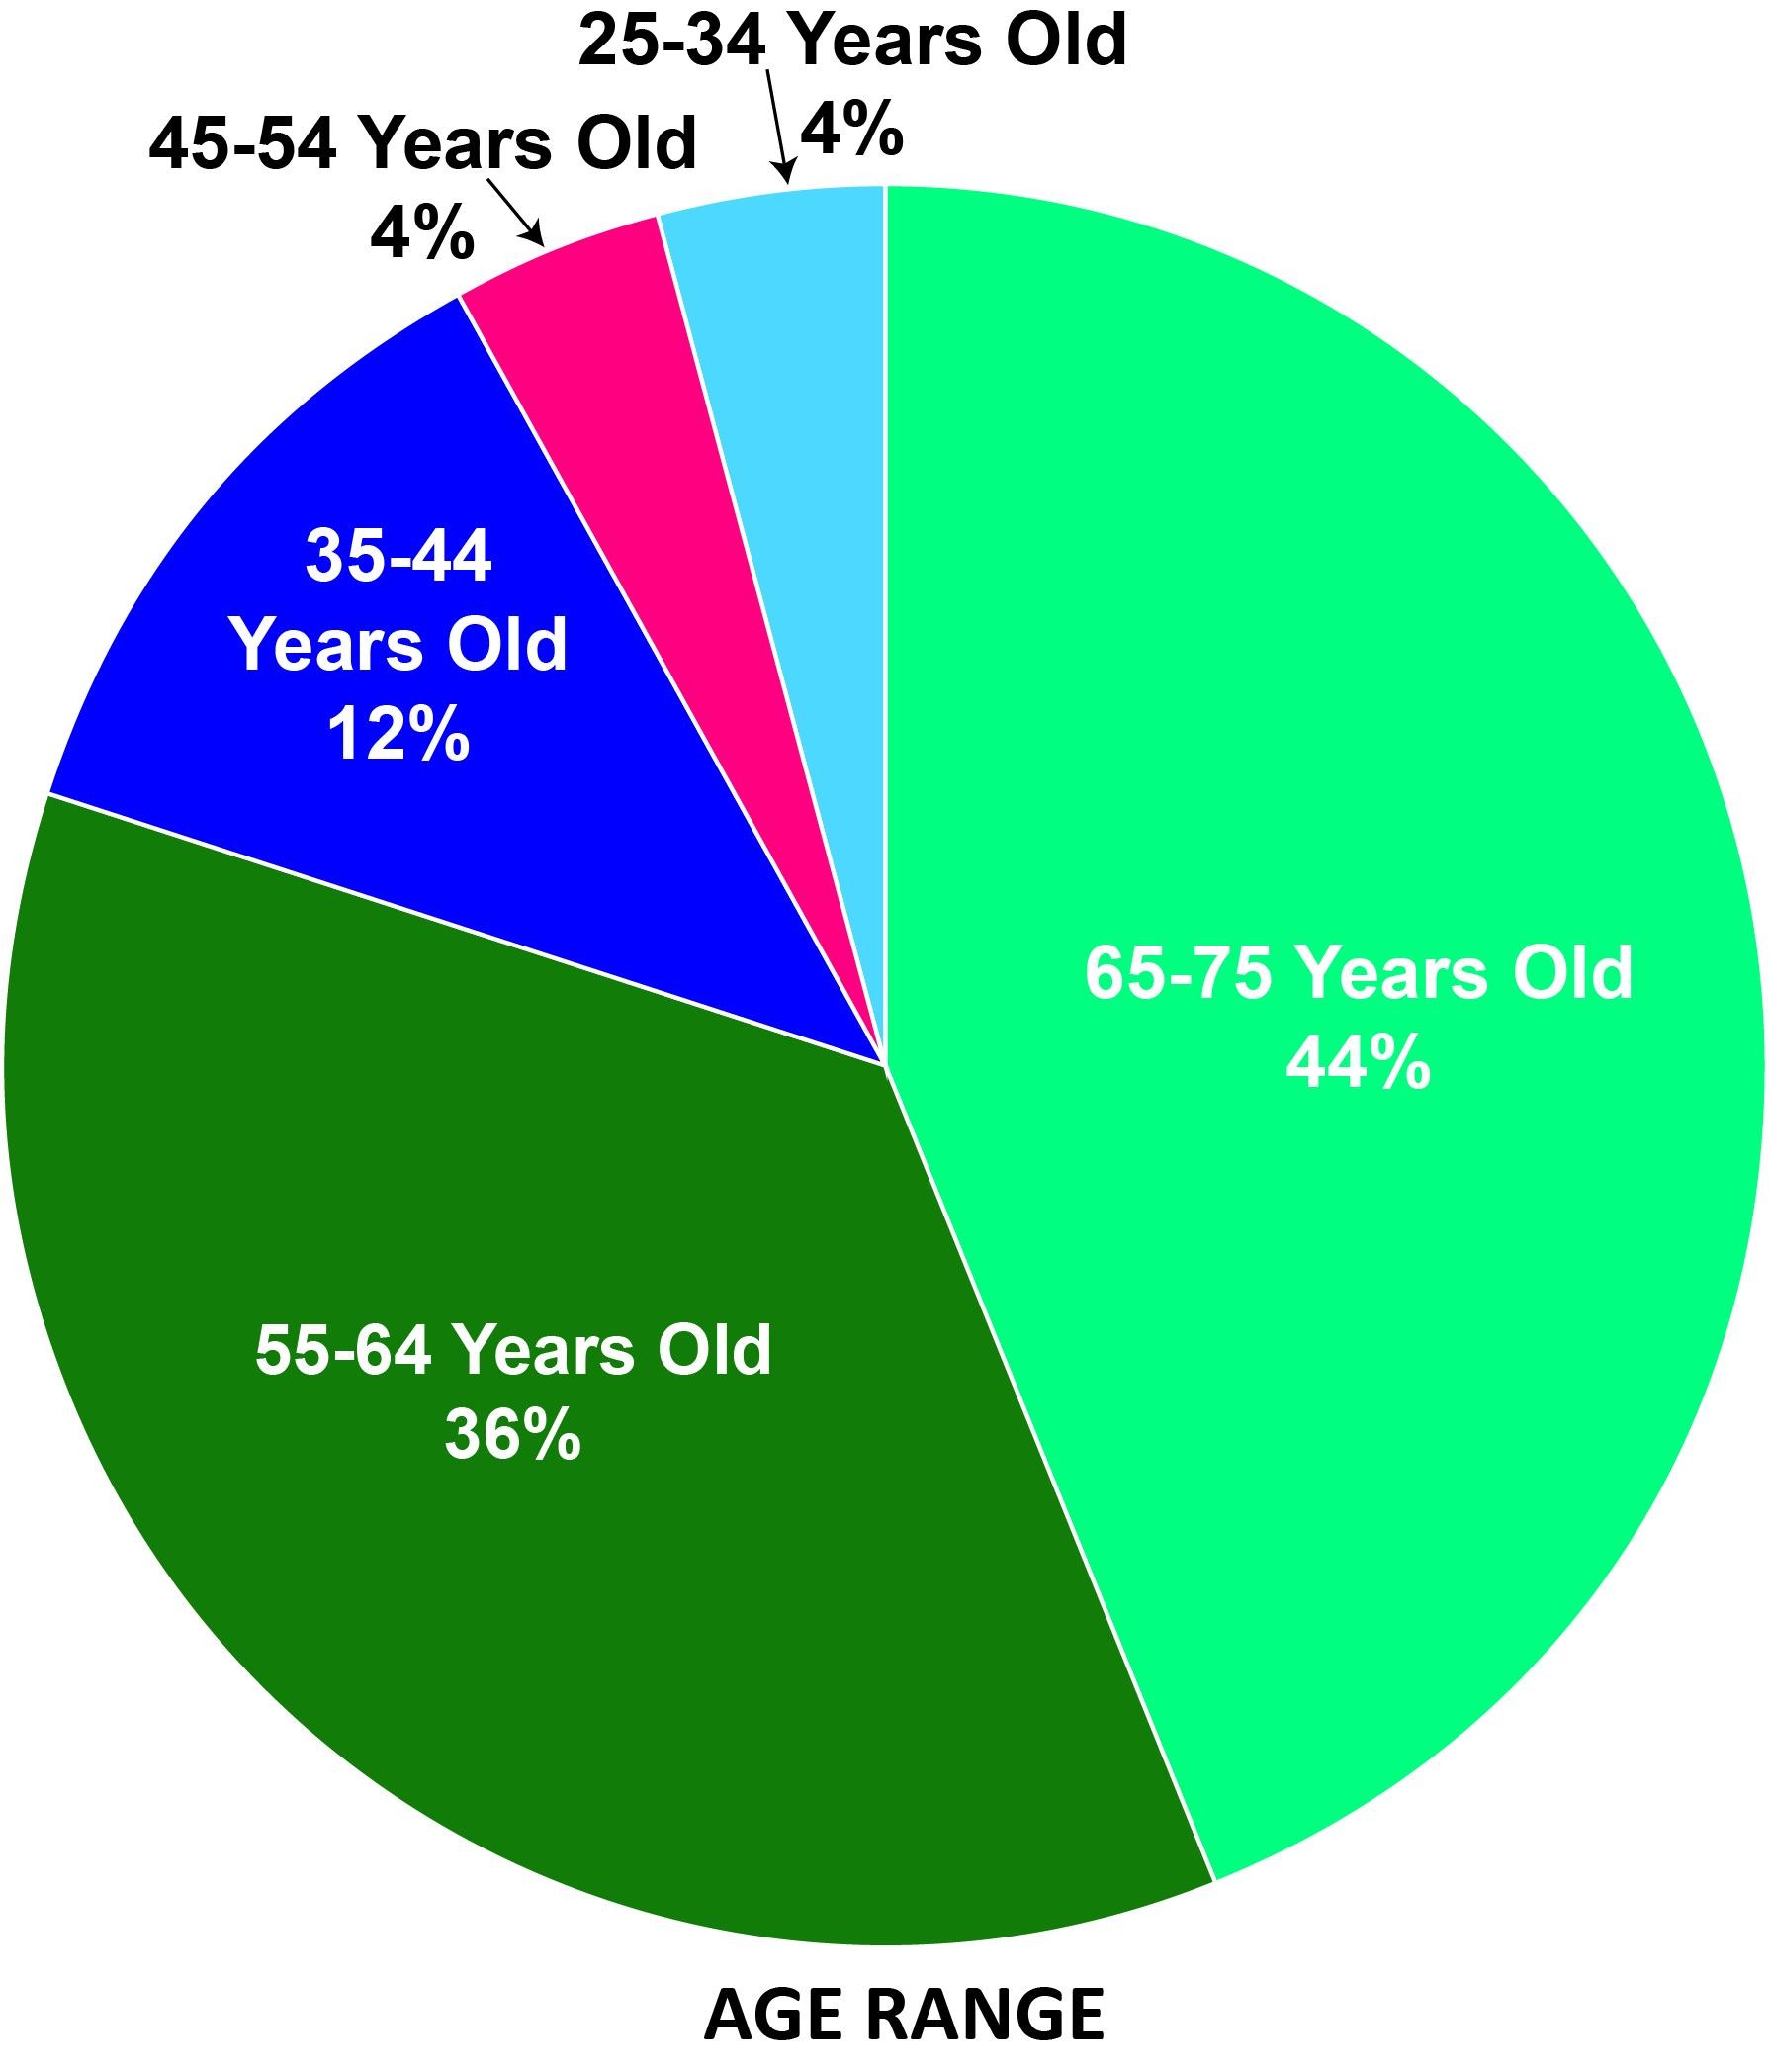 COVID-19 Impact Survey results on age range. 4%  25-34 Years Old, 12% 35-44 Years Old, 4%  45-54 Years Old, 36% 55-64 Years Old, and 44% 65-75 Years Old.